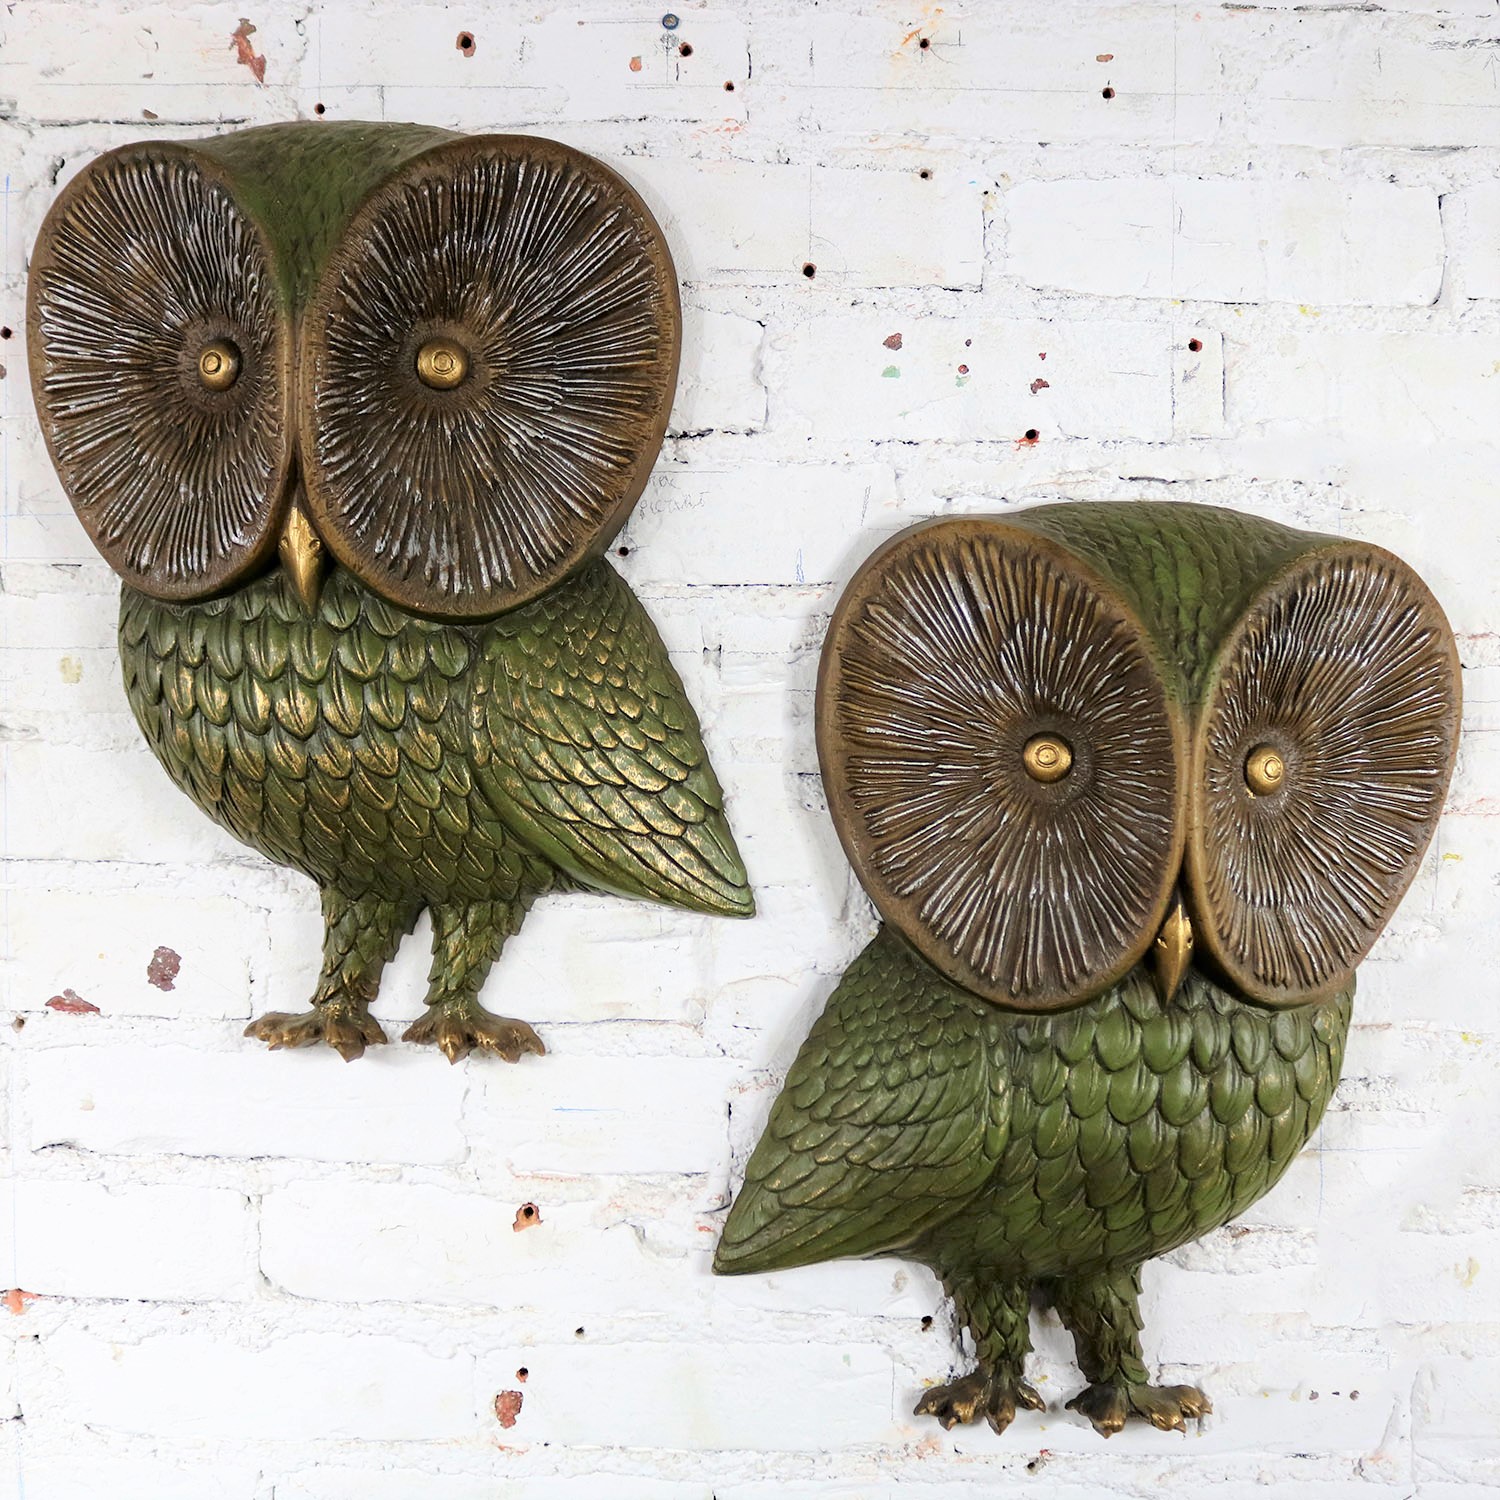 Owl Wall Hanging Sculpture Plaques by Burwood Product Co. Mid Century Modern Pair